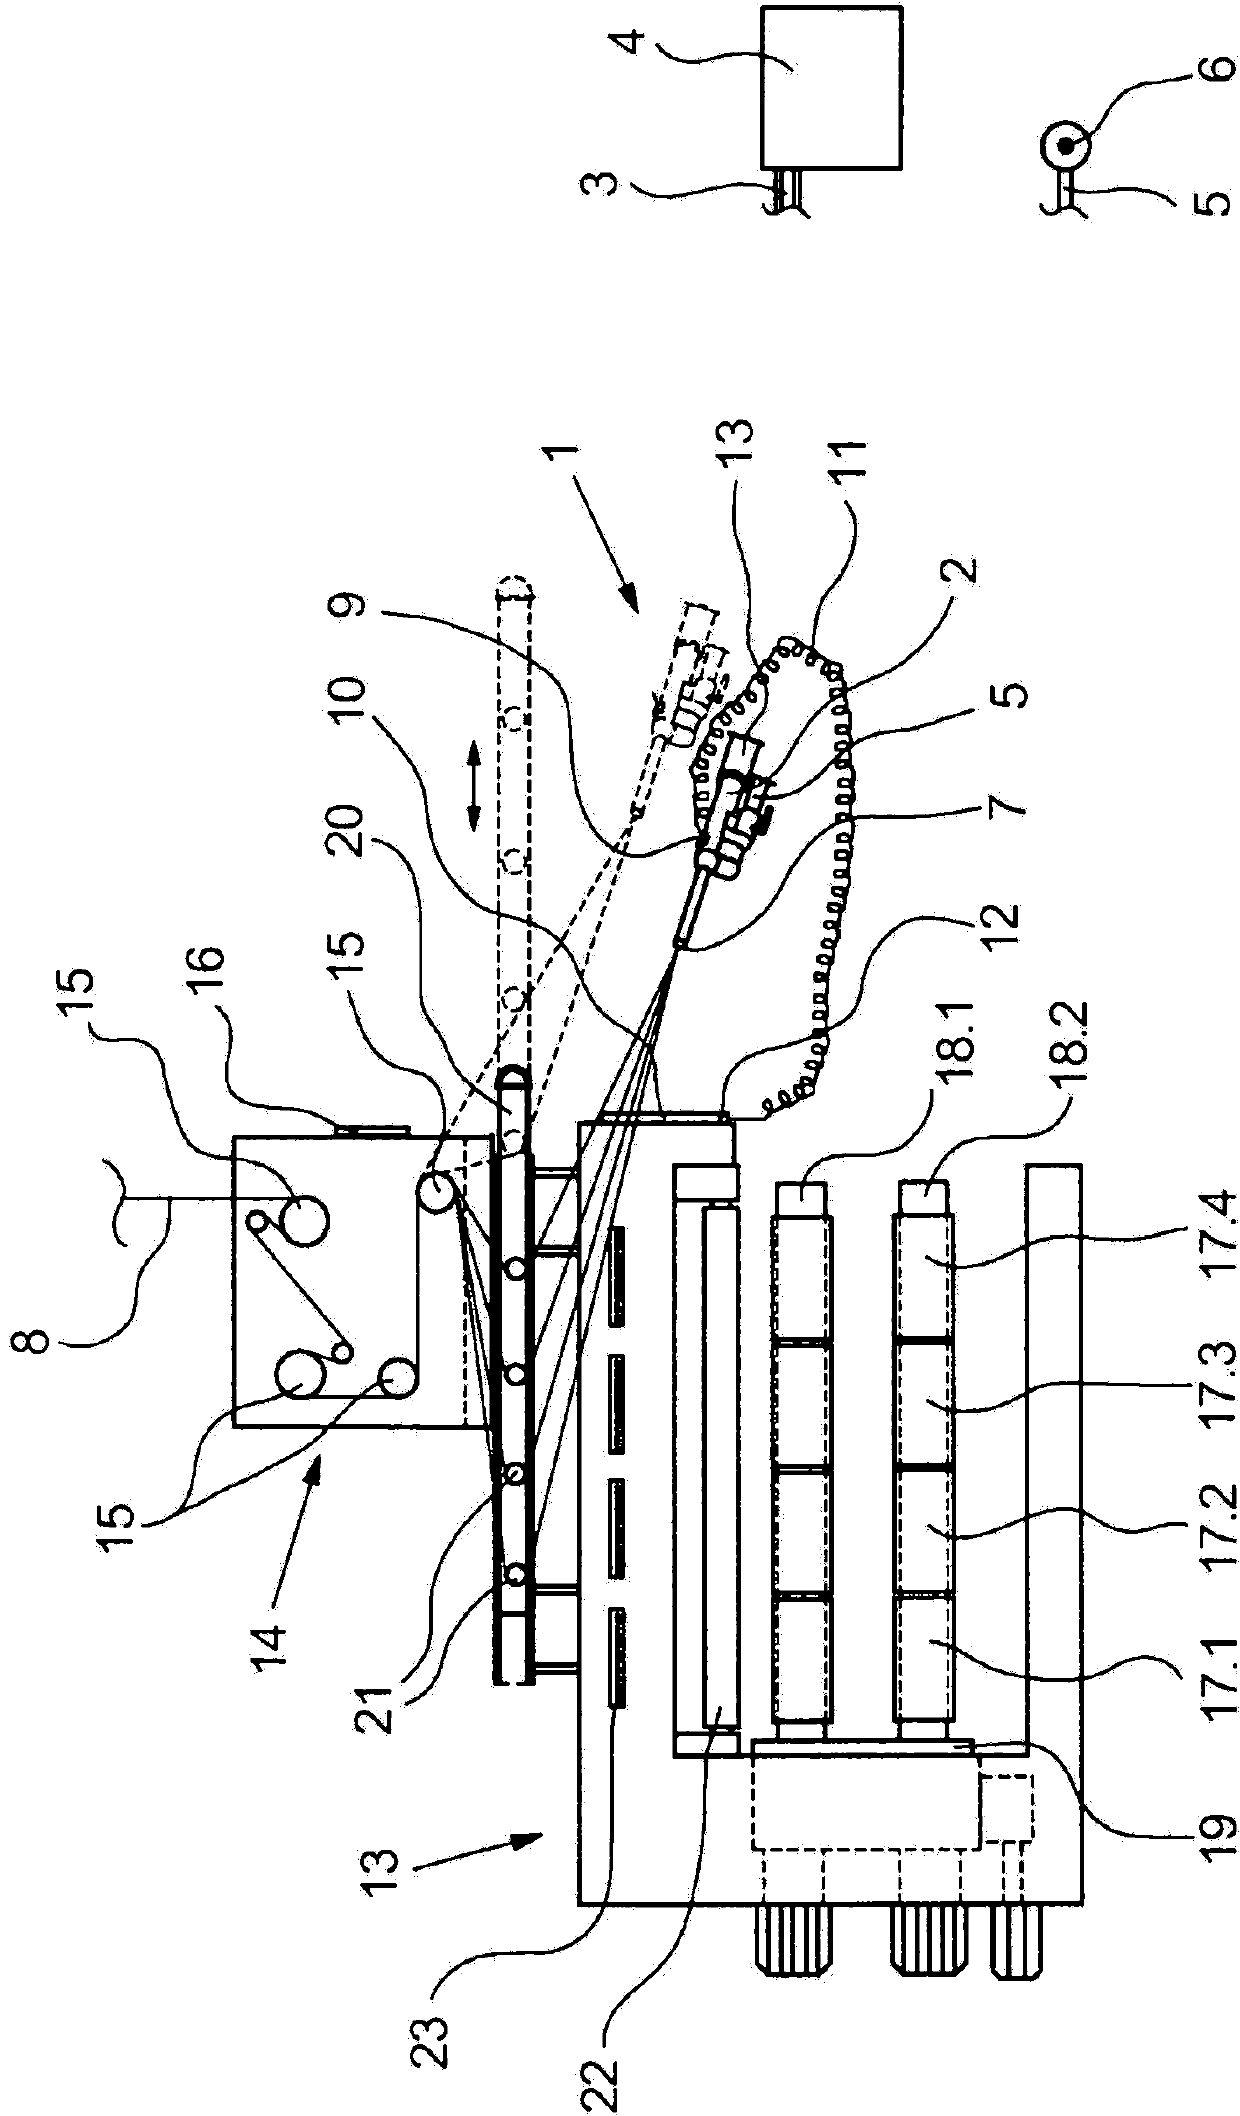 Auxiliary apparatus for the manual guidance of moving threads